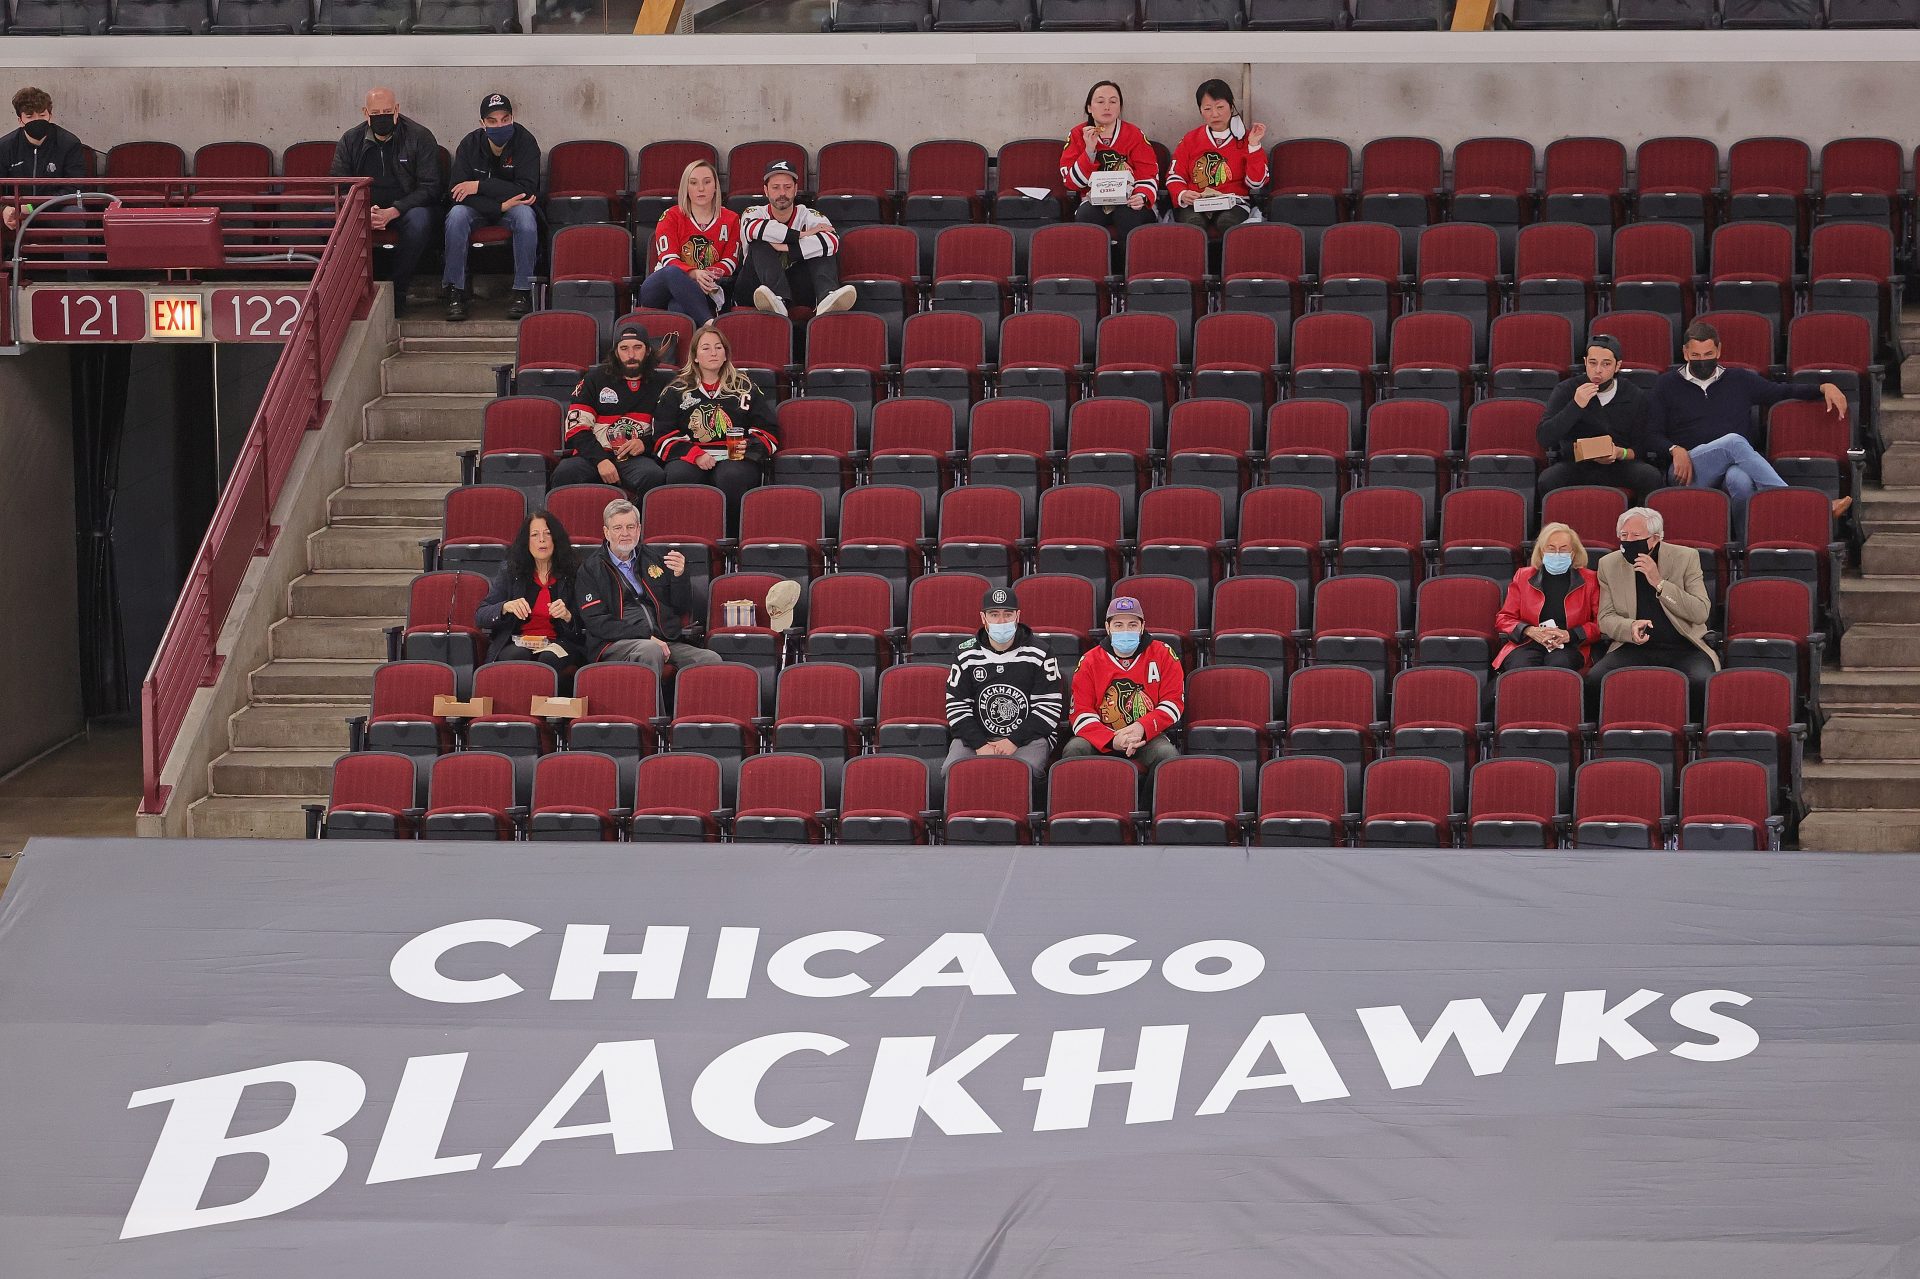 Blackhawks Hire Company to Habits Independent Review of Brad Aldrich Allegations